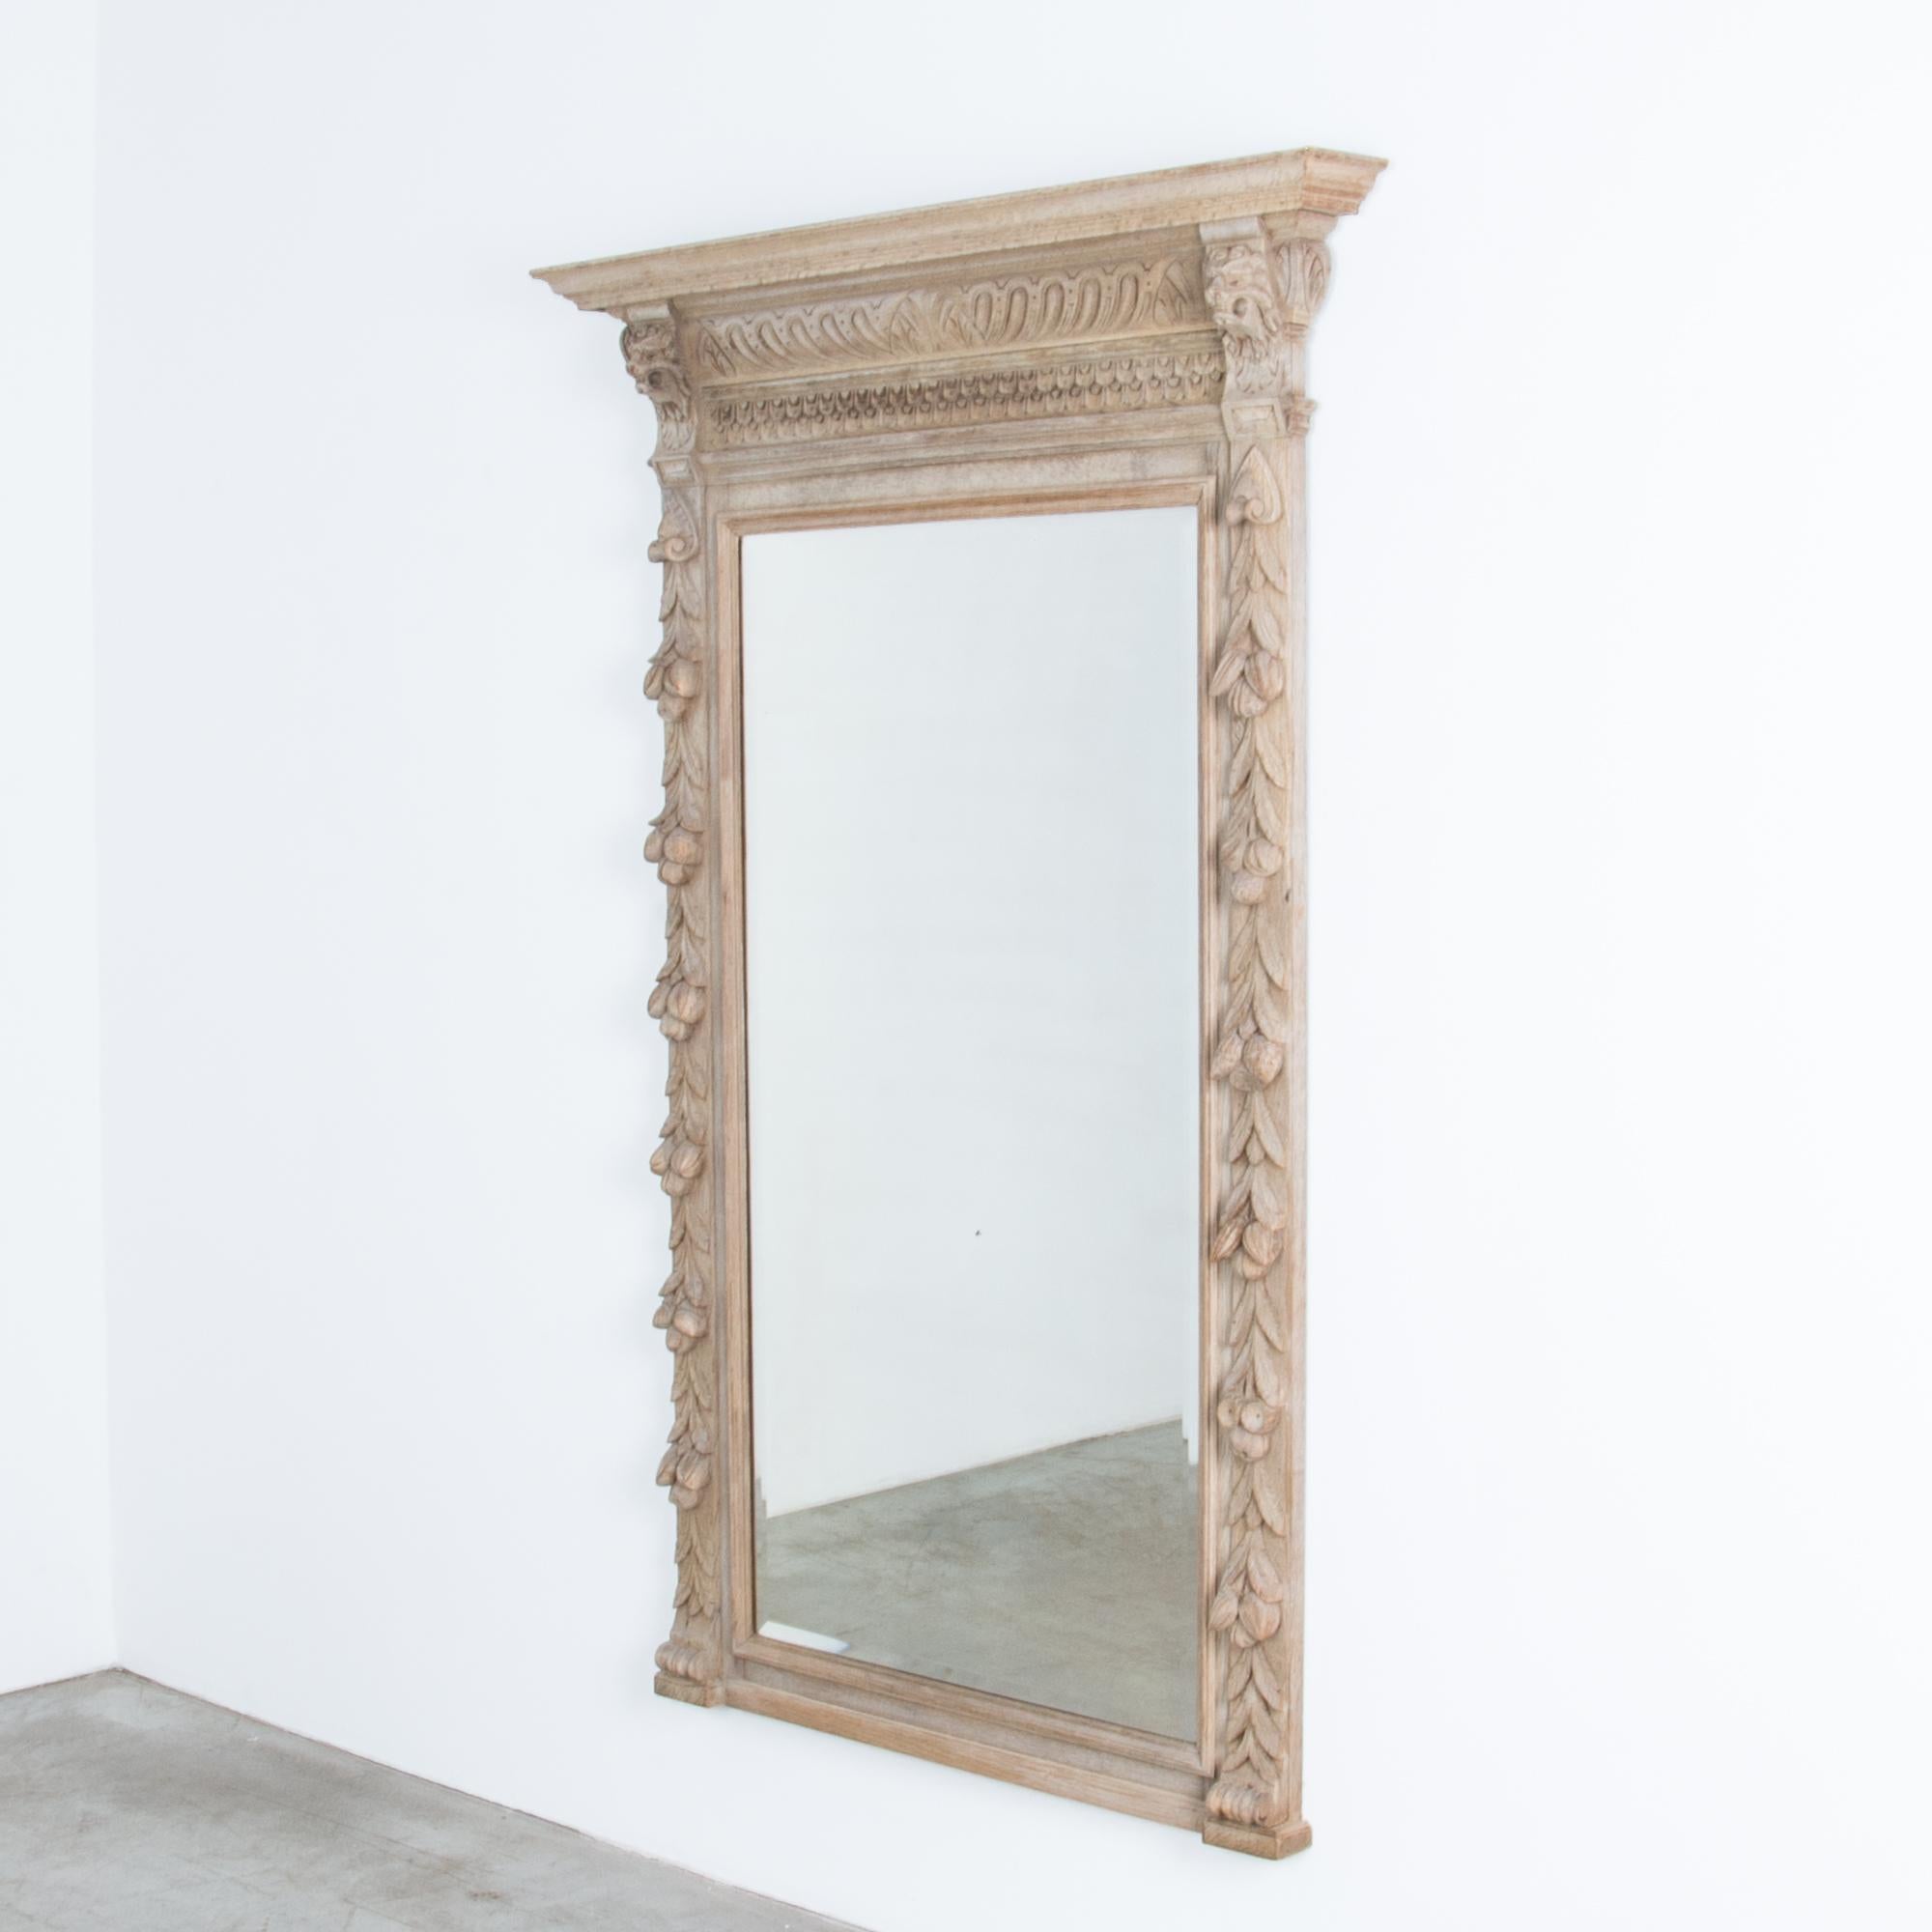 French Provincial Antique Wall Mirror with Carved Wooden Frame